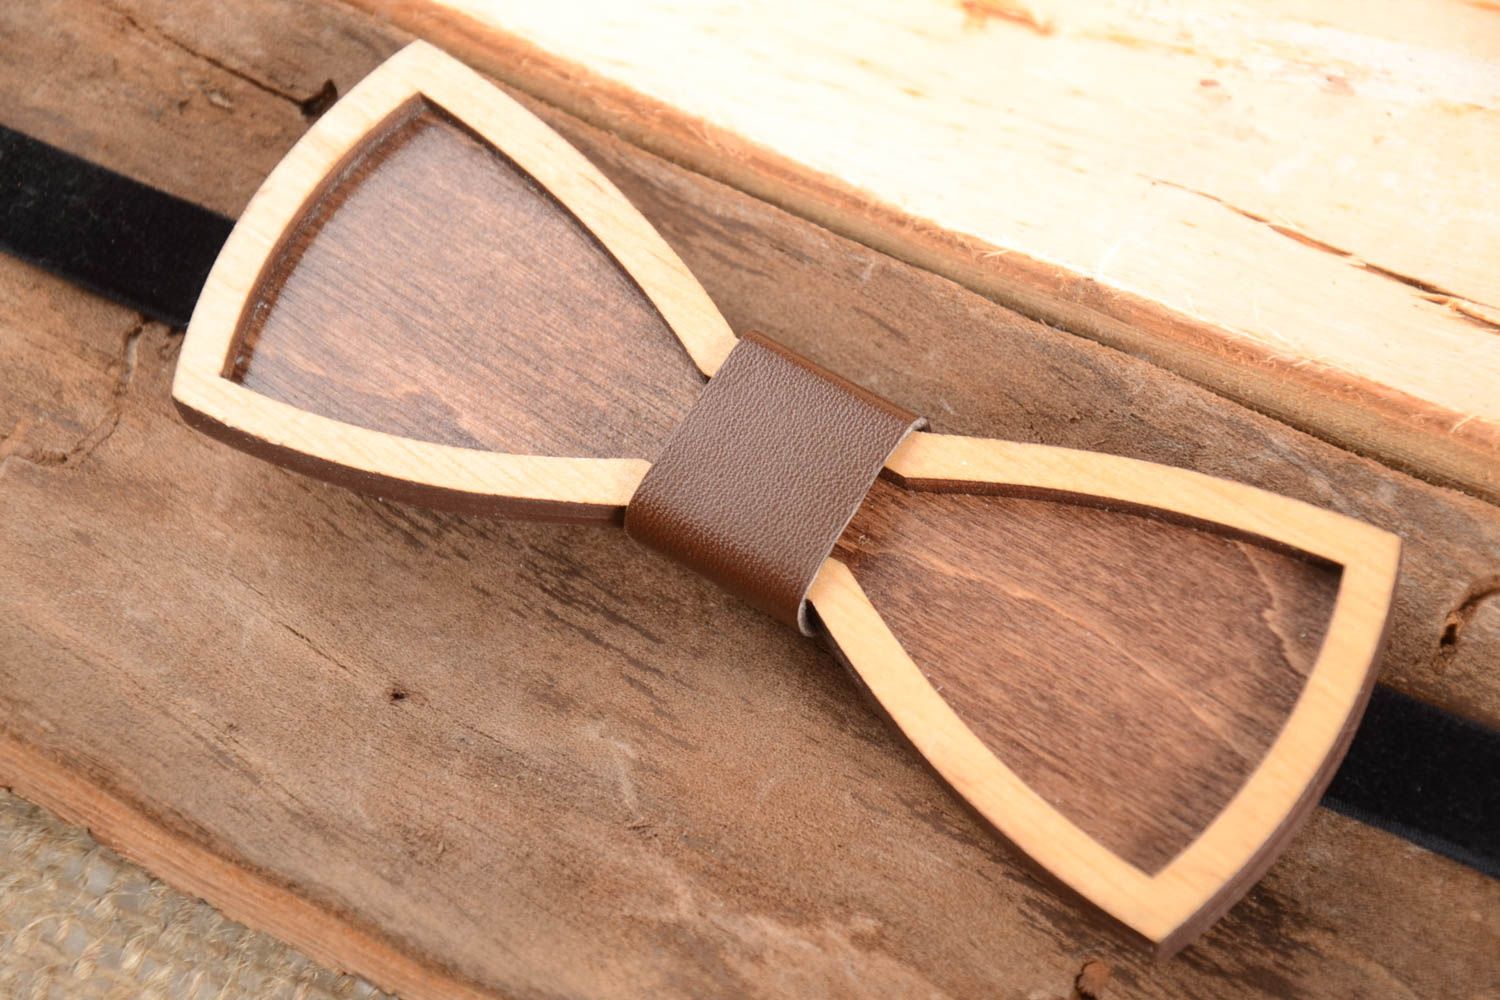 Homemade jewelry wooden bow tie designer accessories fashionable tie cool gifts photo 1